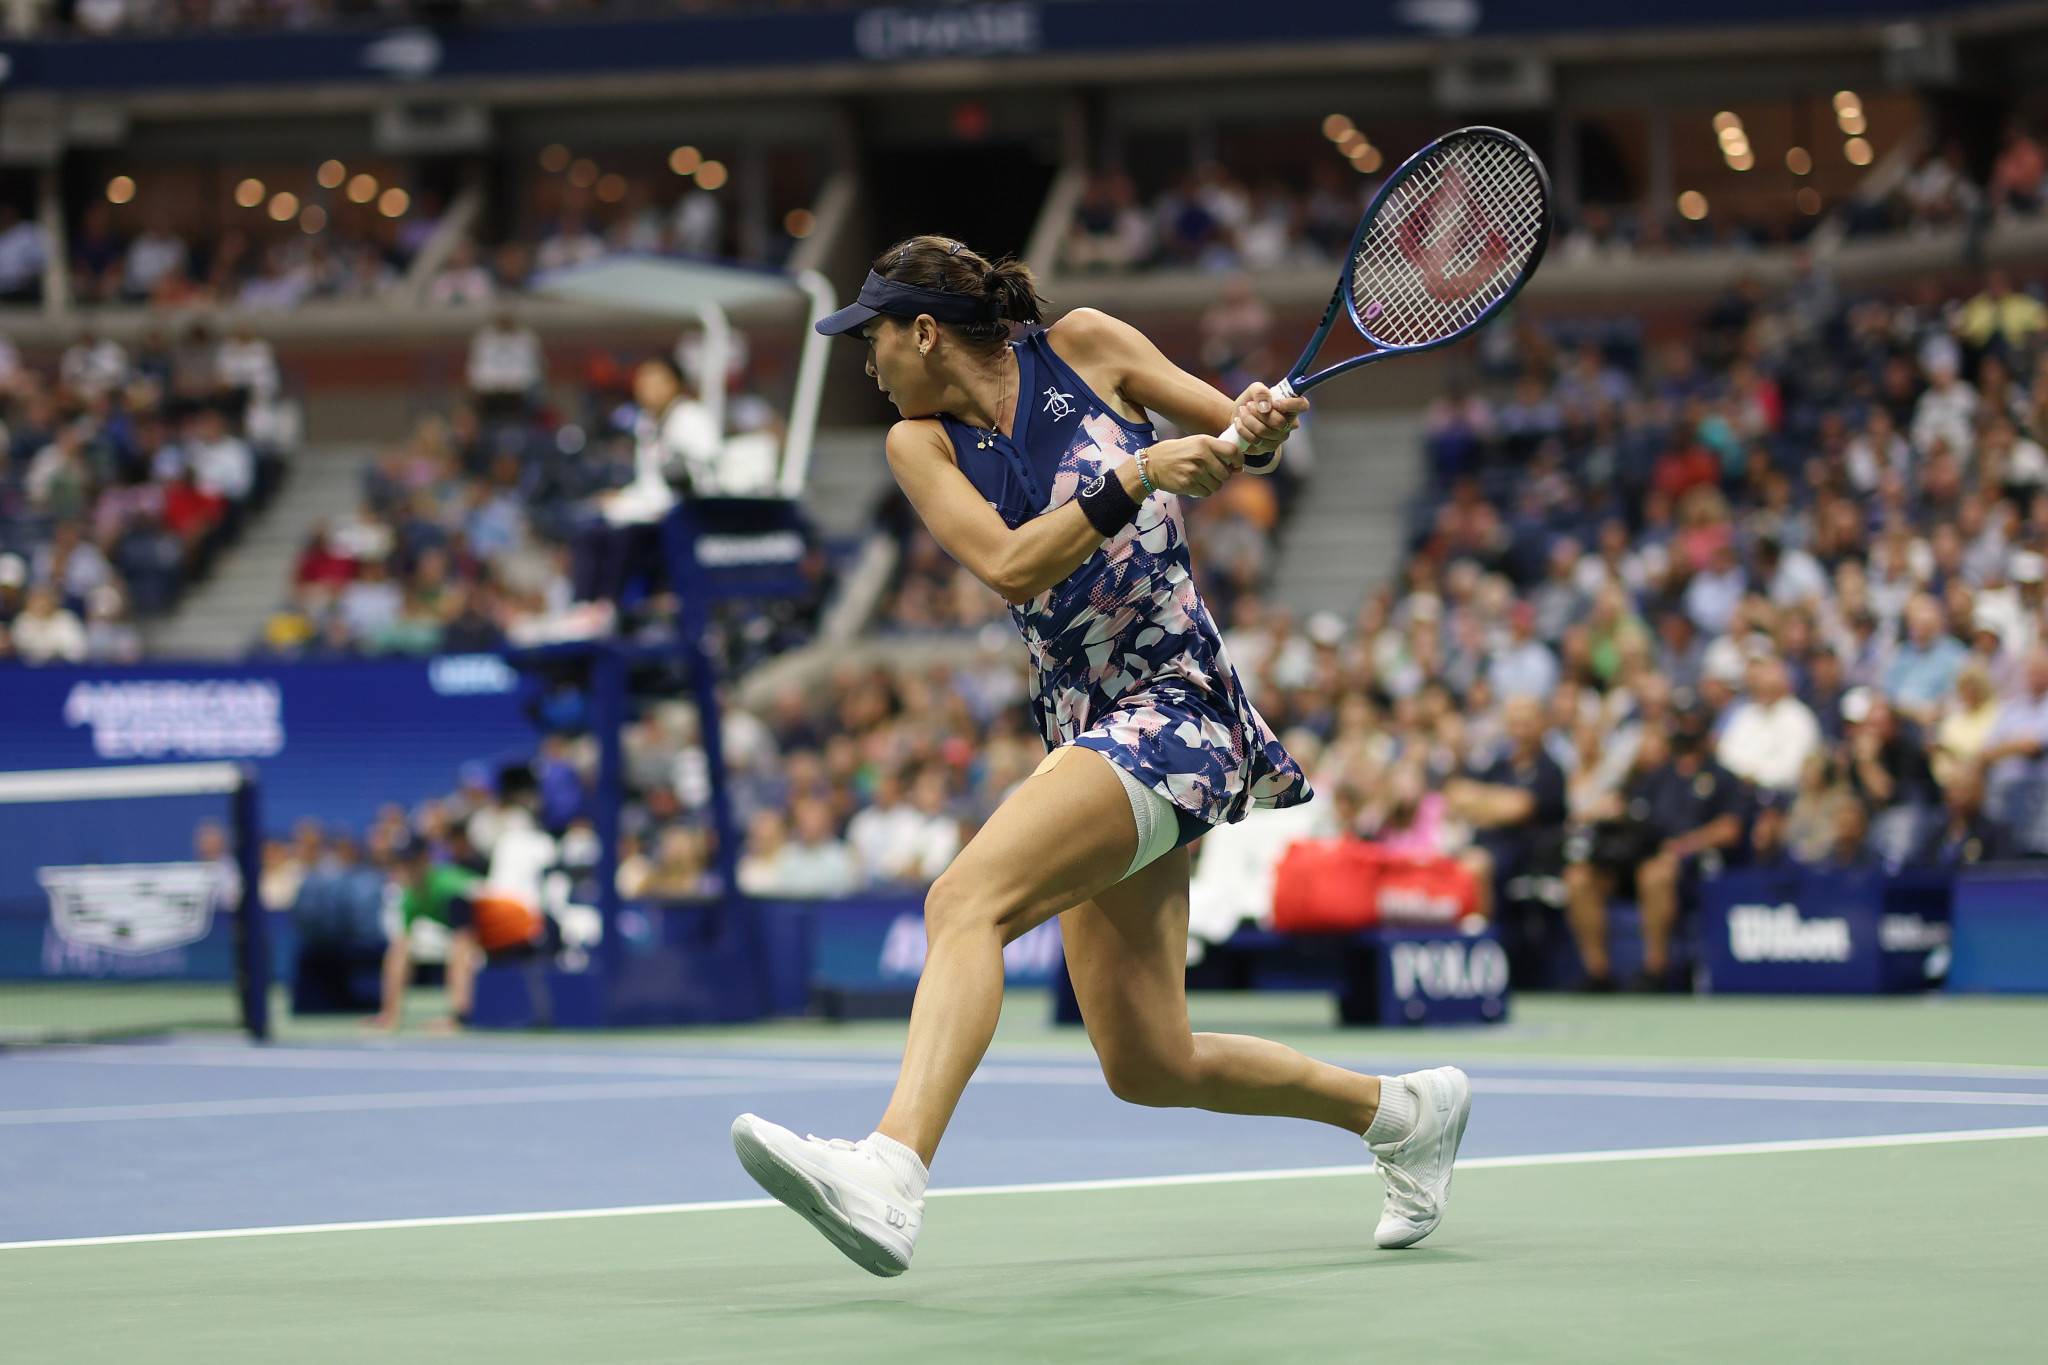 Tomljanovic fell at the quarter-final hurdle after an impressive US Open run that included a memorable victory over American great Serena Williams ©Getty Images